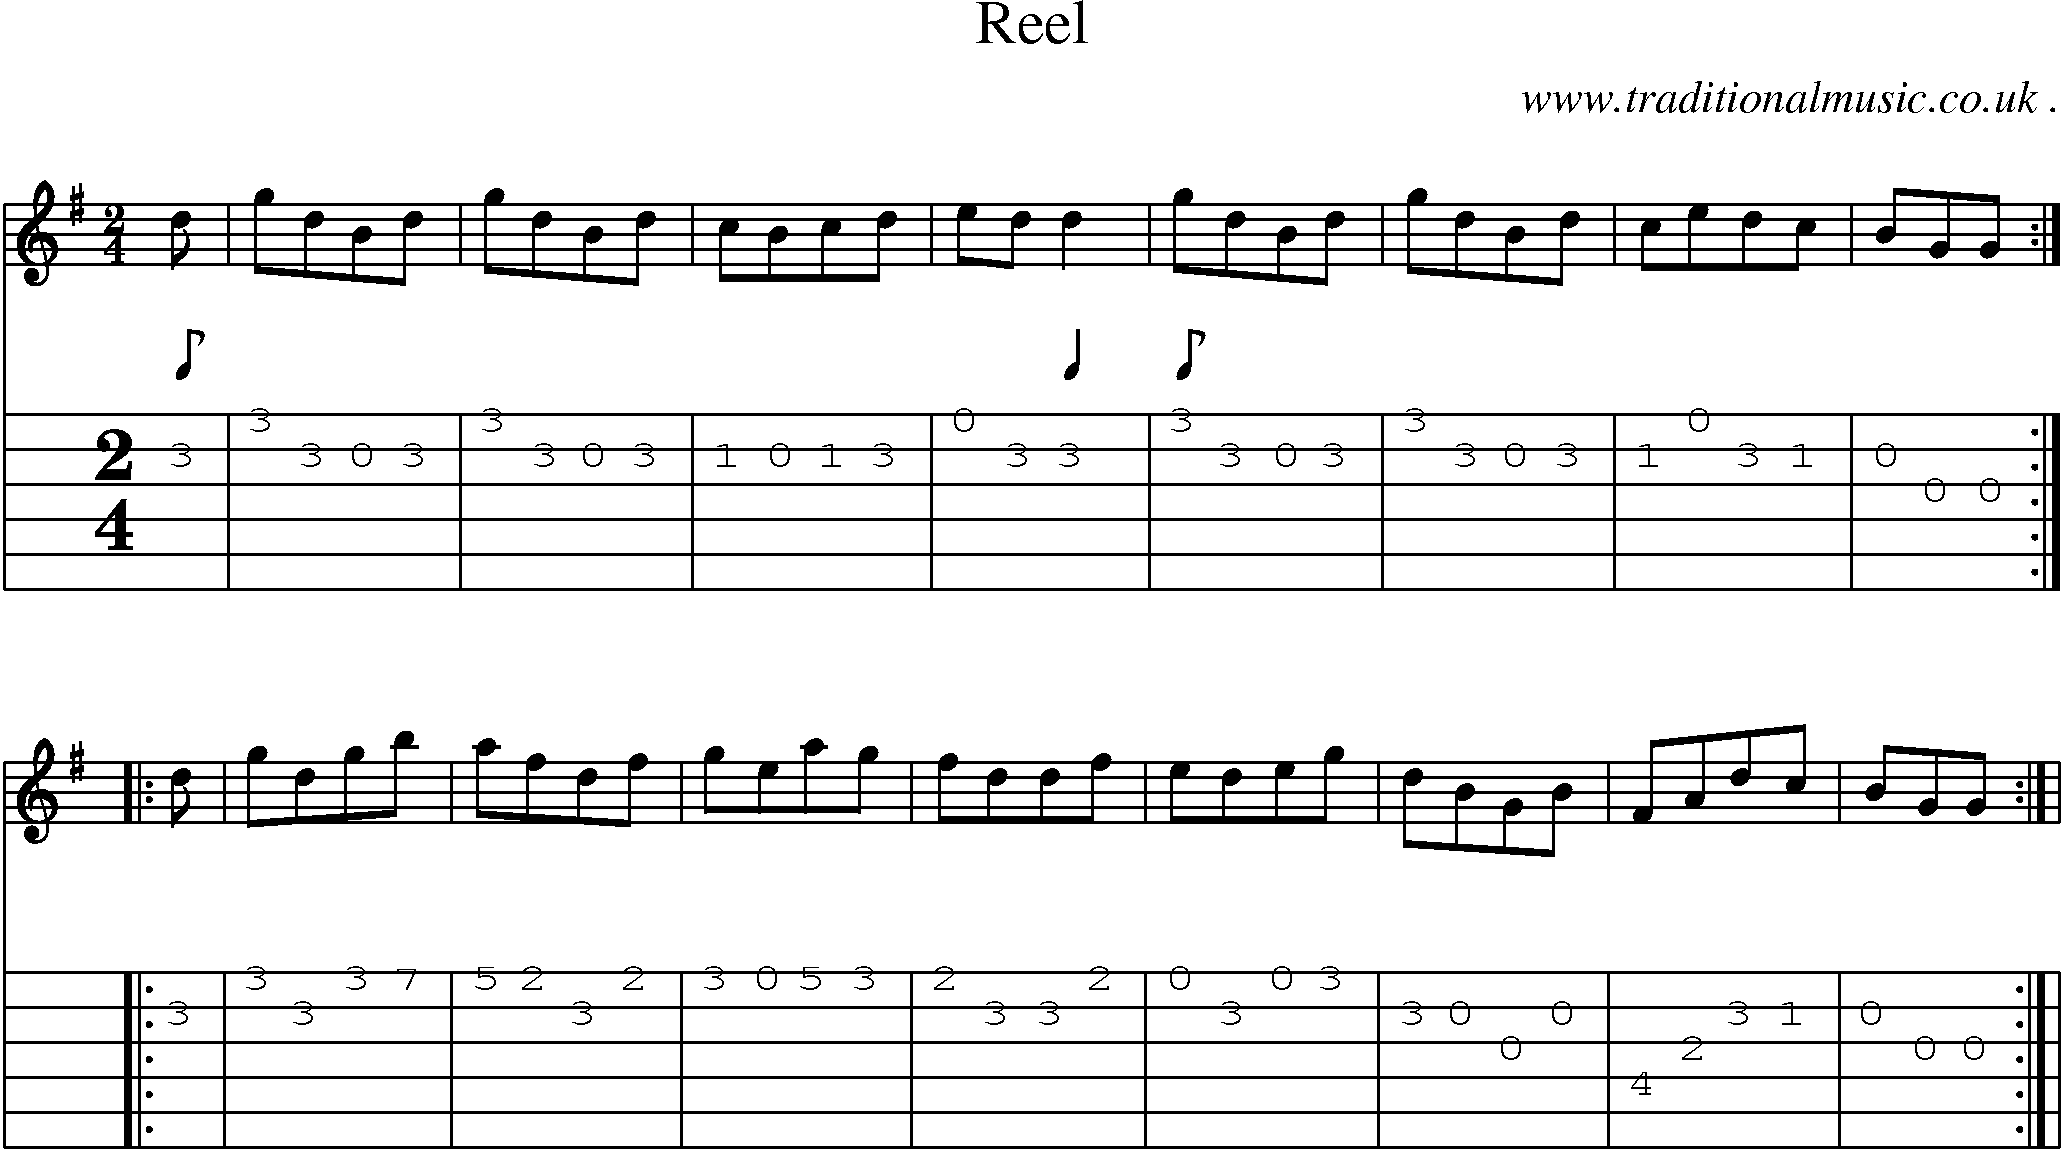 Sheet-Music and Guitar Tabs for Reel